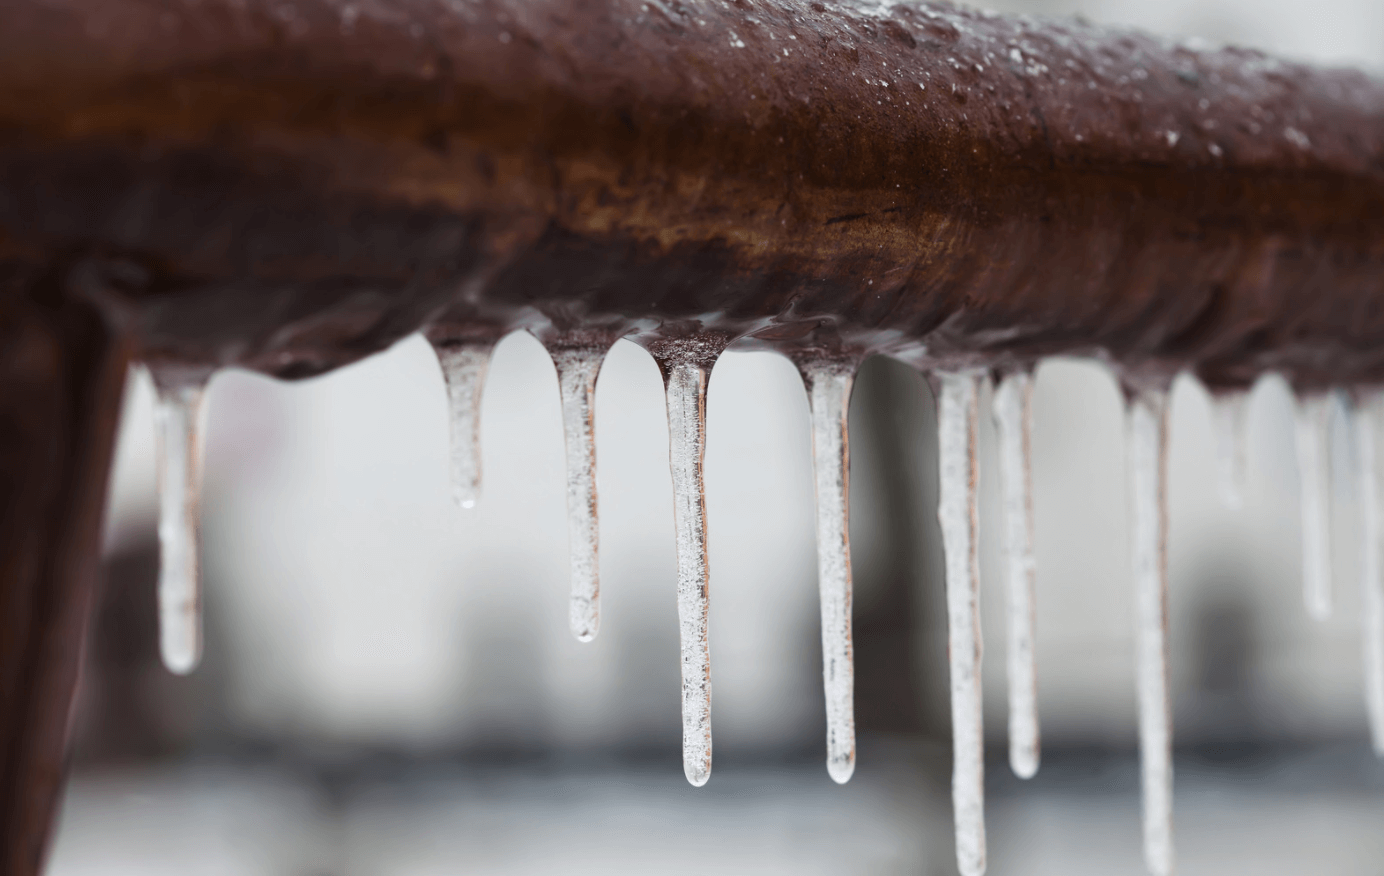 How To Stop Caravan Pipes Freezing